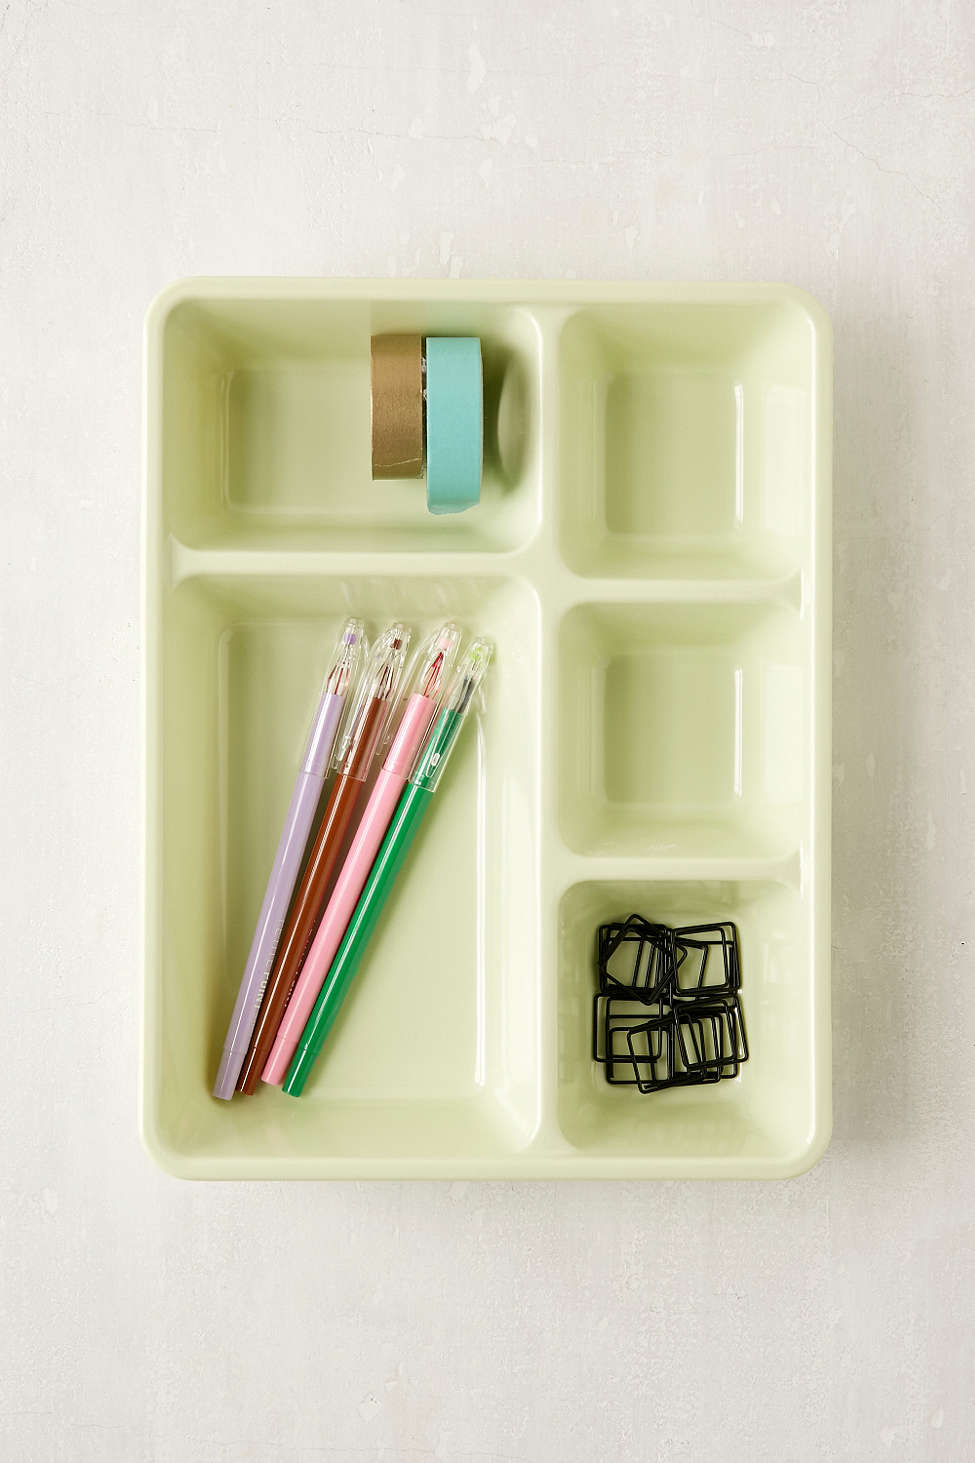 Desk organizer tray from Urban Outfitters